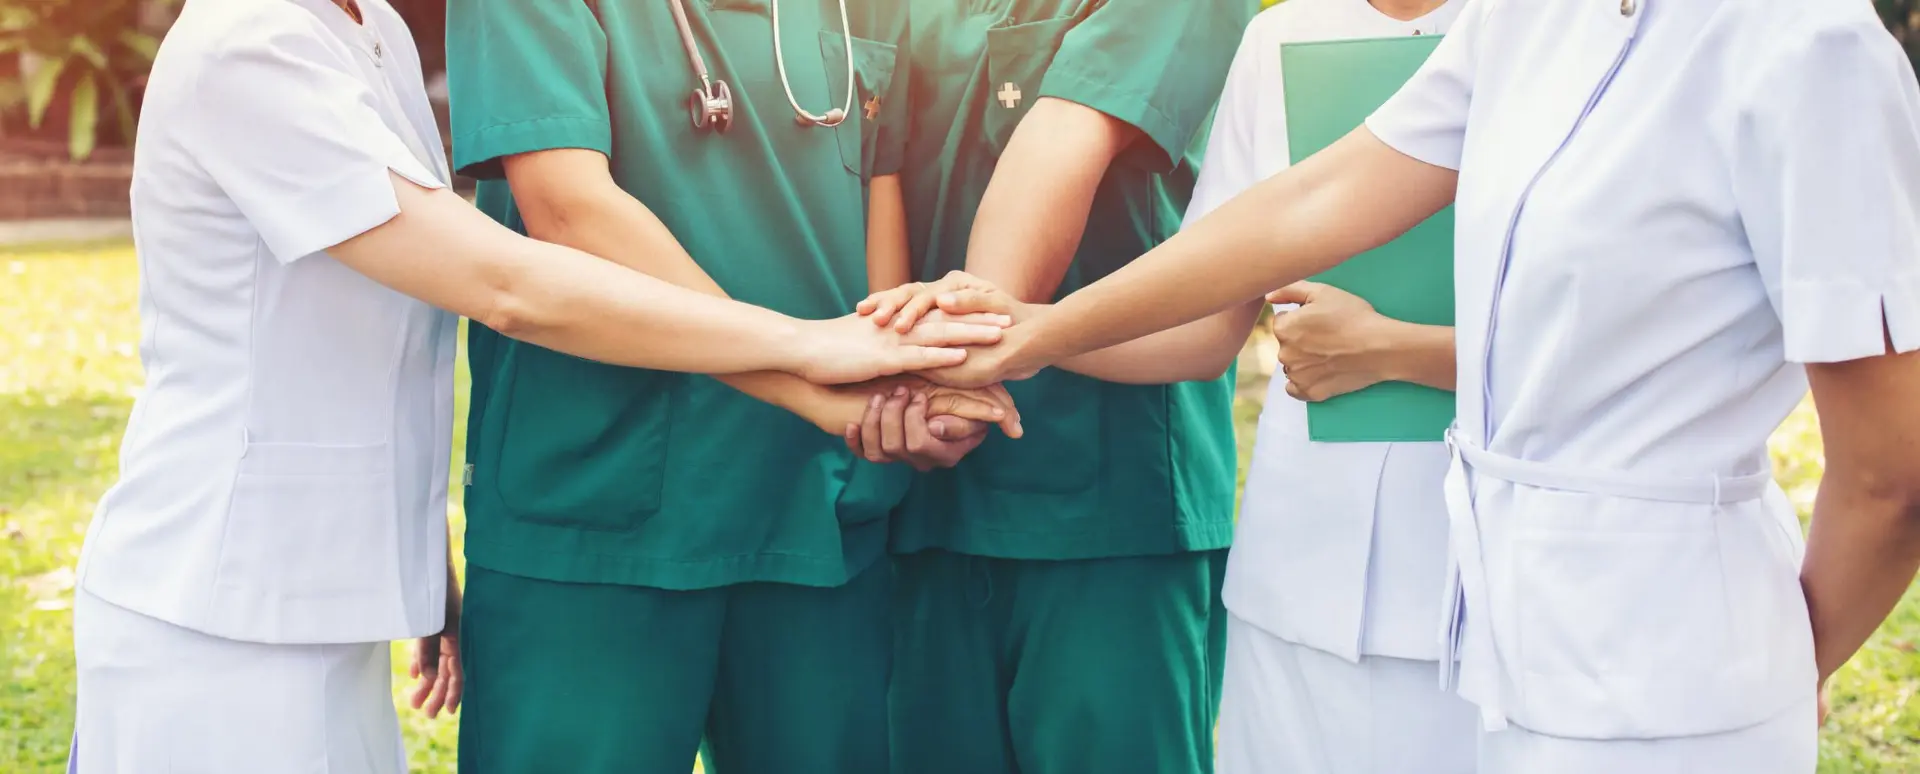 doctors, nurses place hands on top of each other, together concept